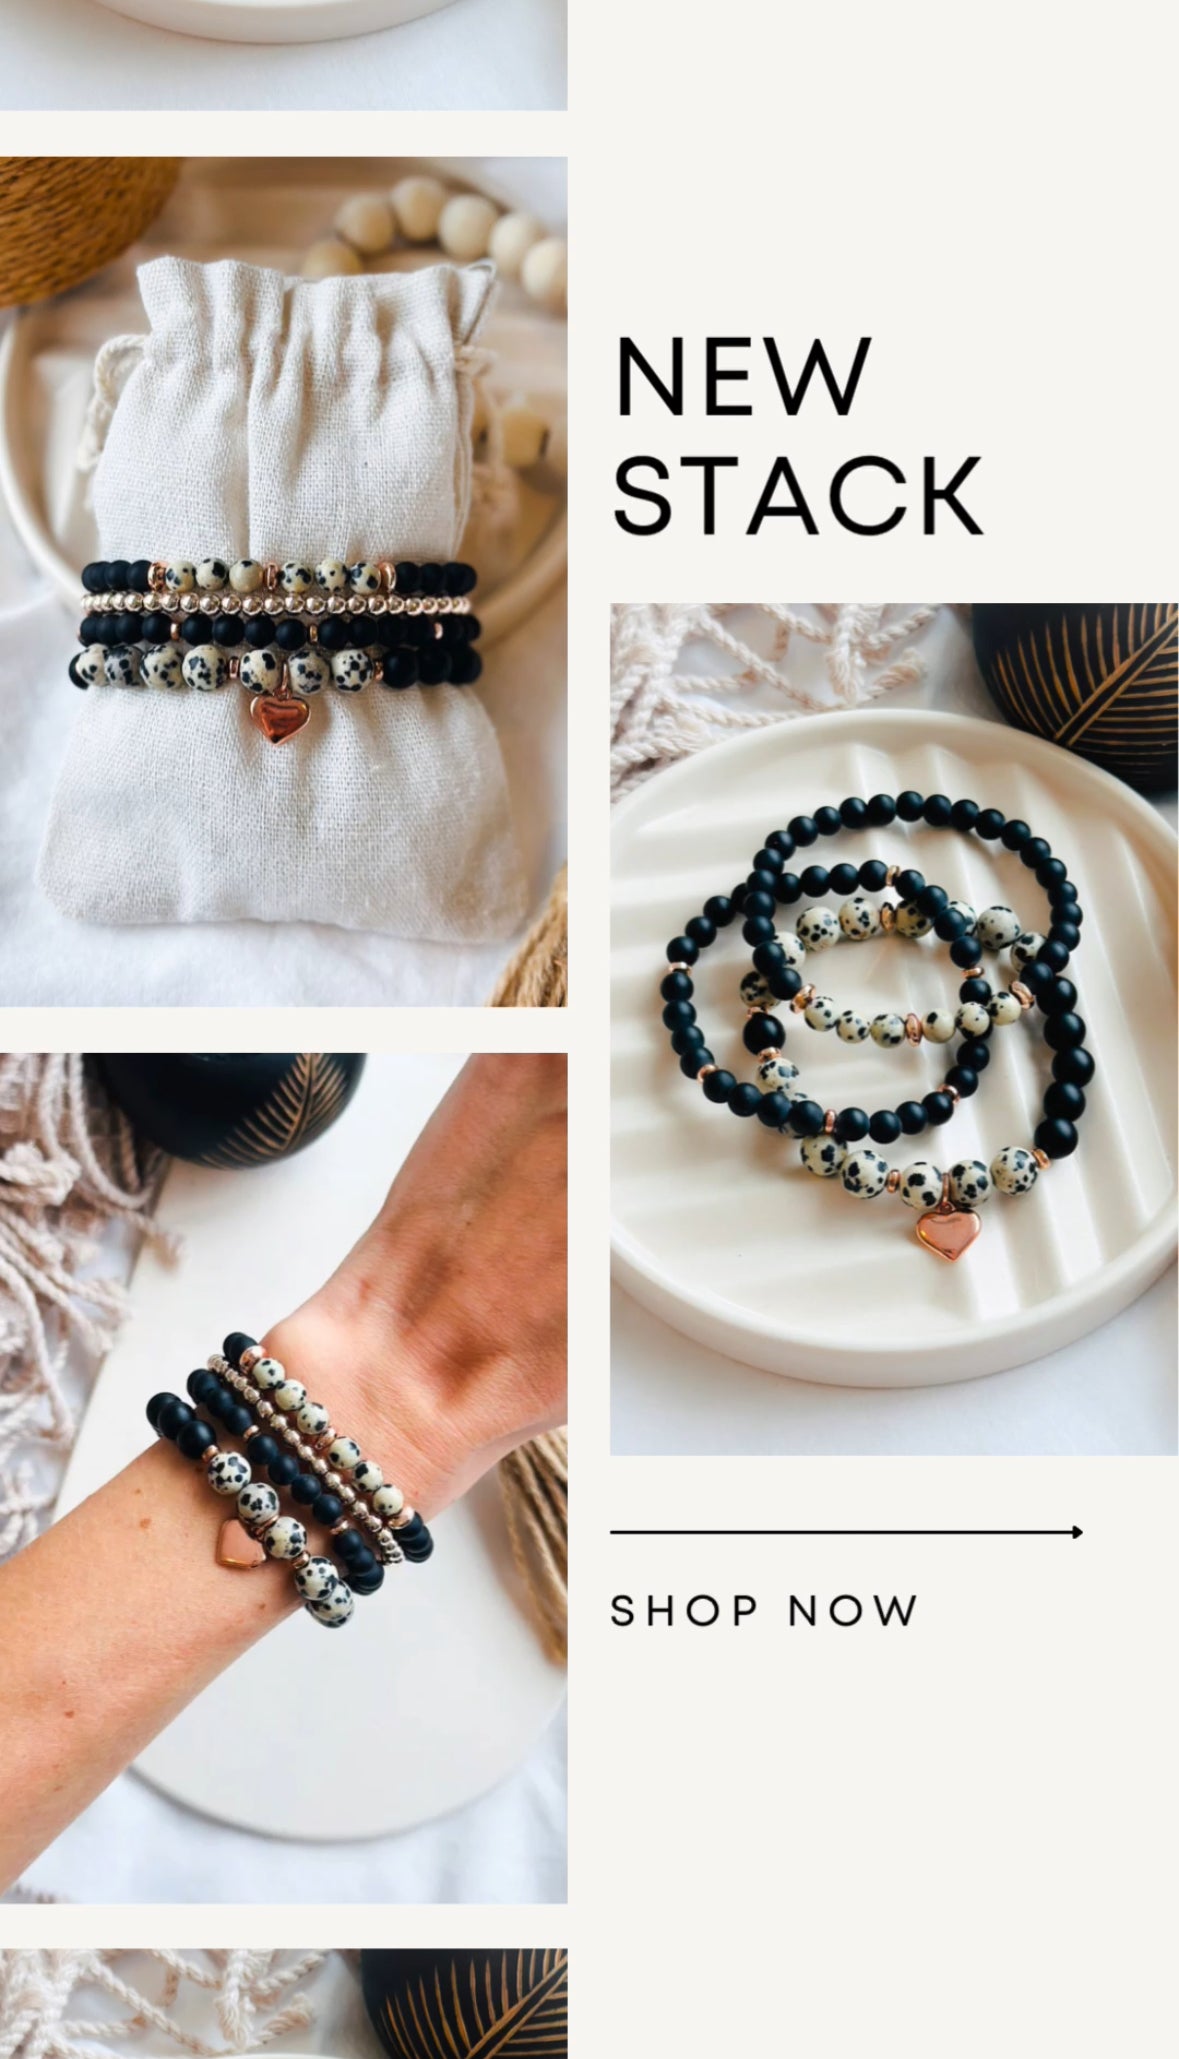 The "Love & Strength" Stacking Set